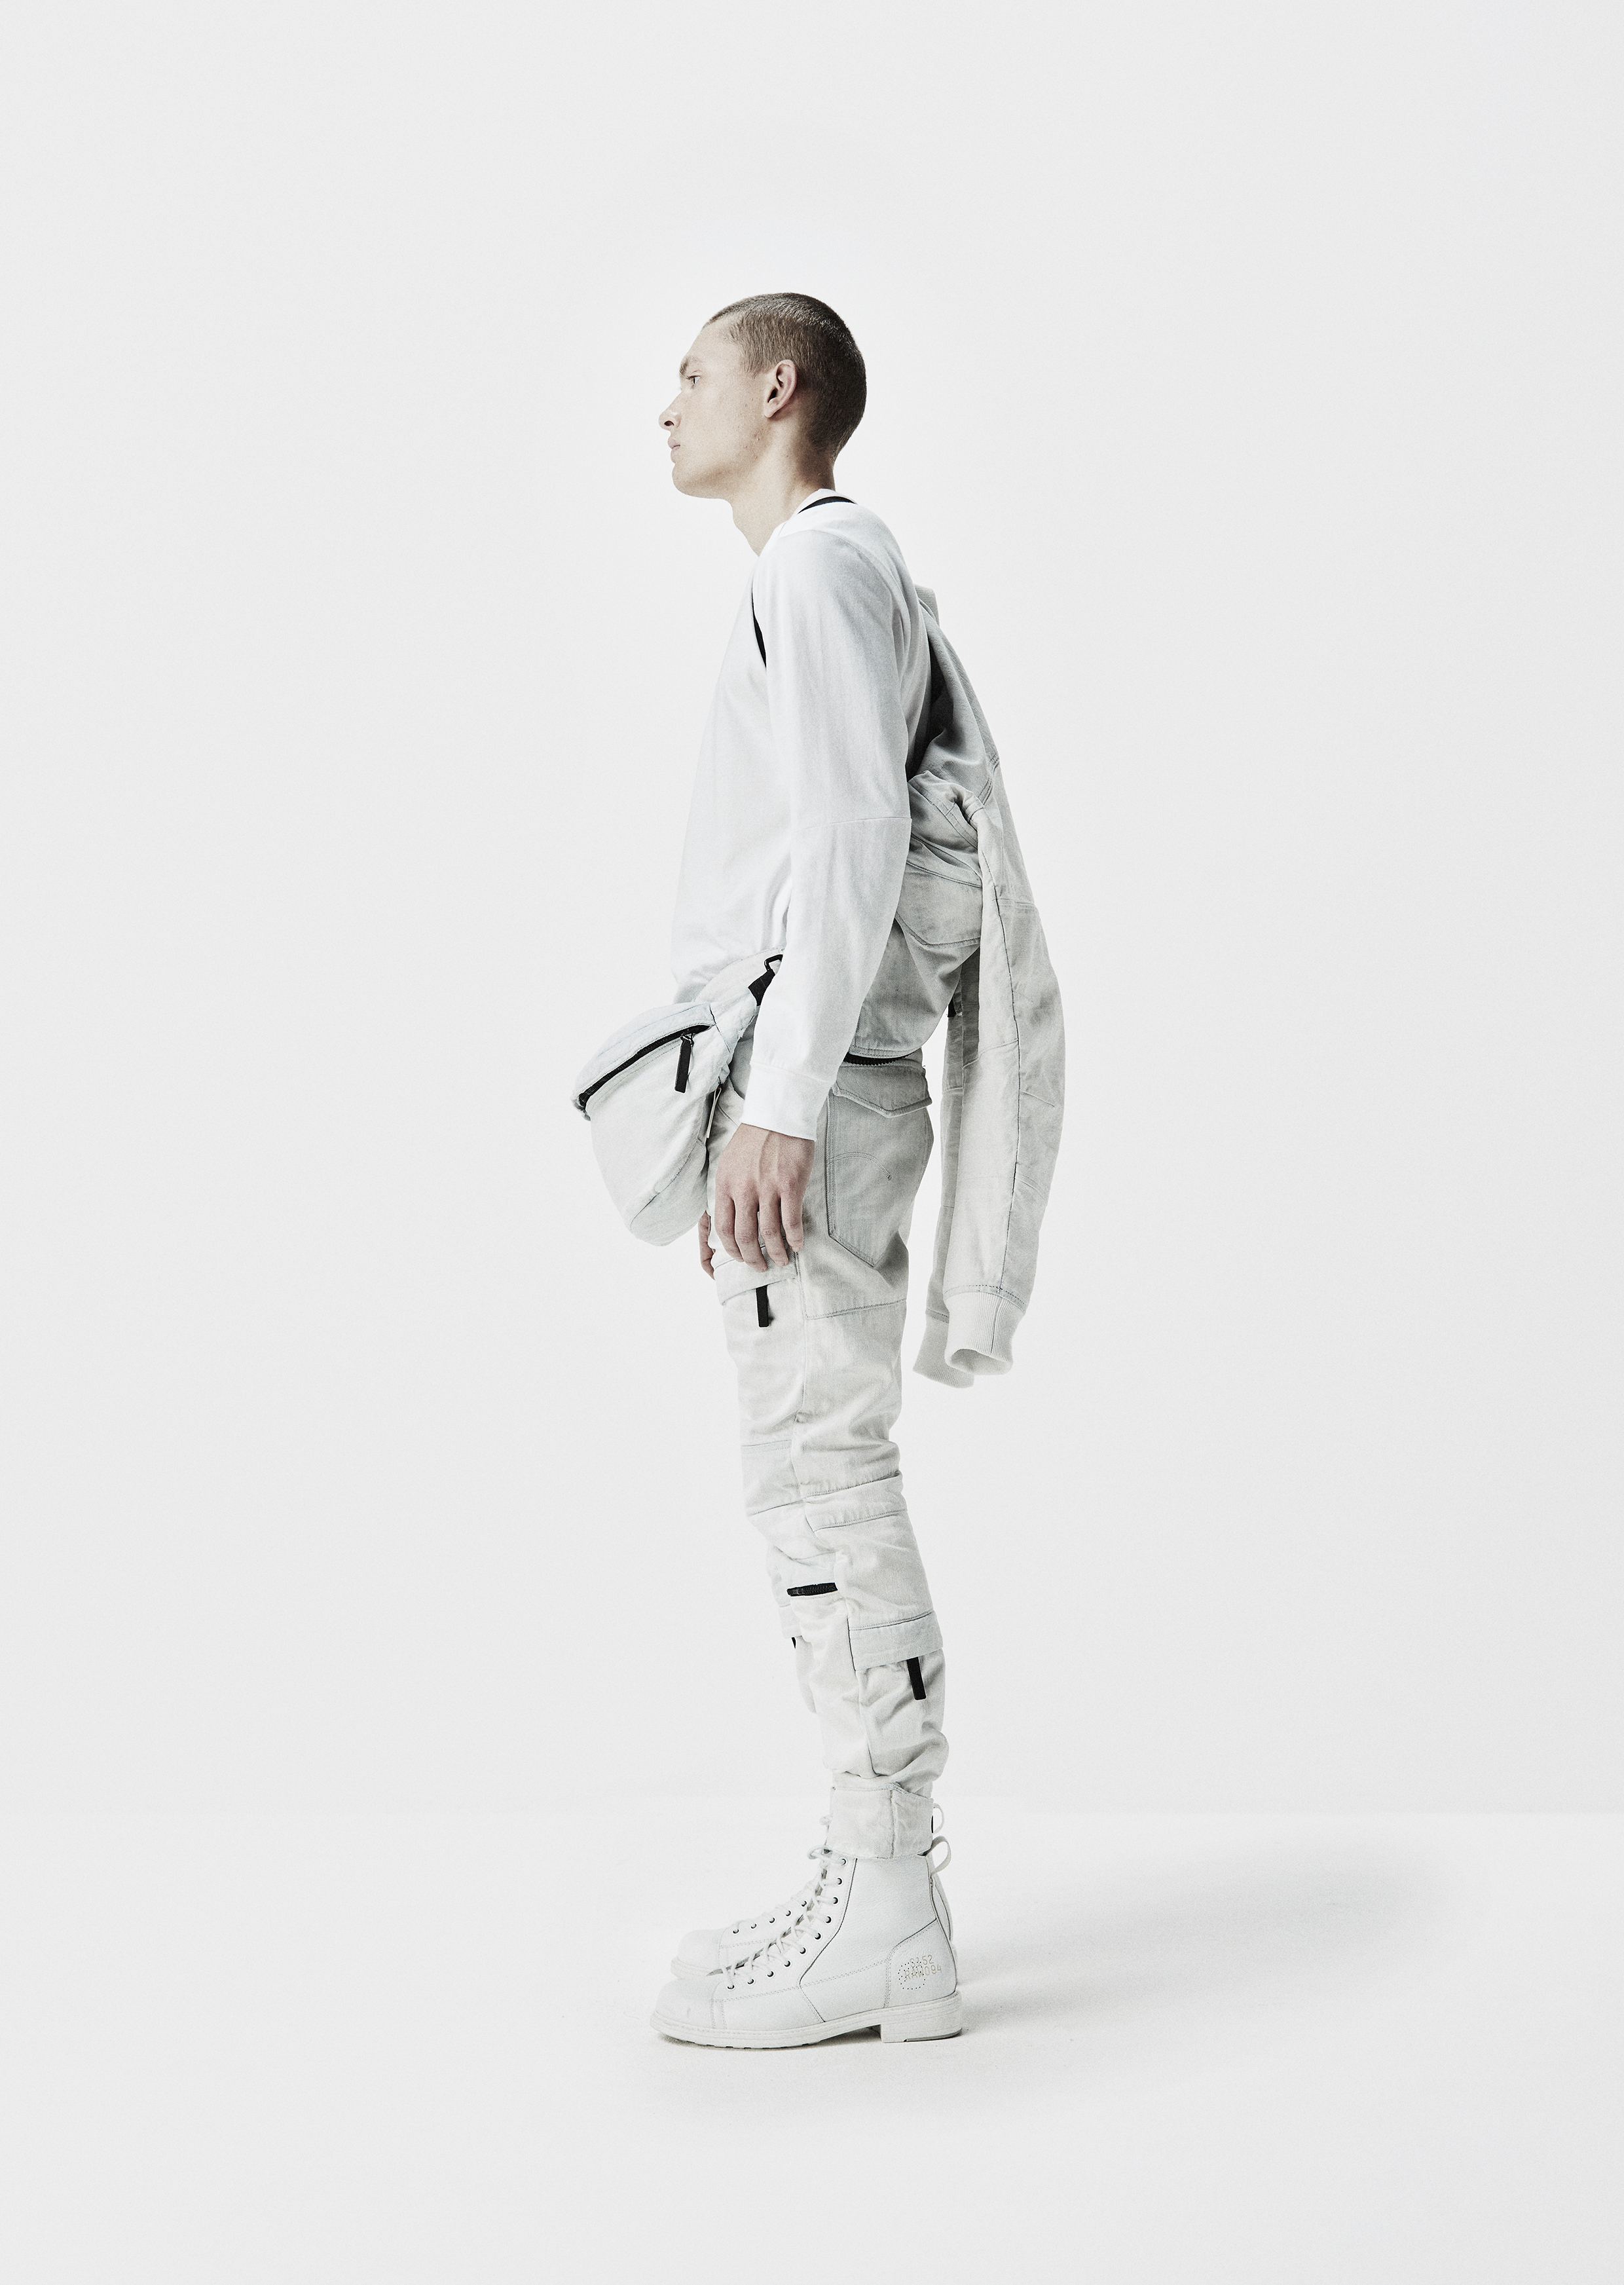 G-STAR RAW RESEARCH BY AITOR THROUP | CRASH Magazine